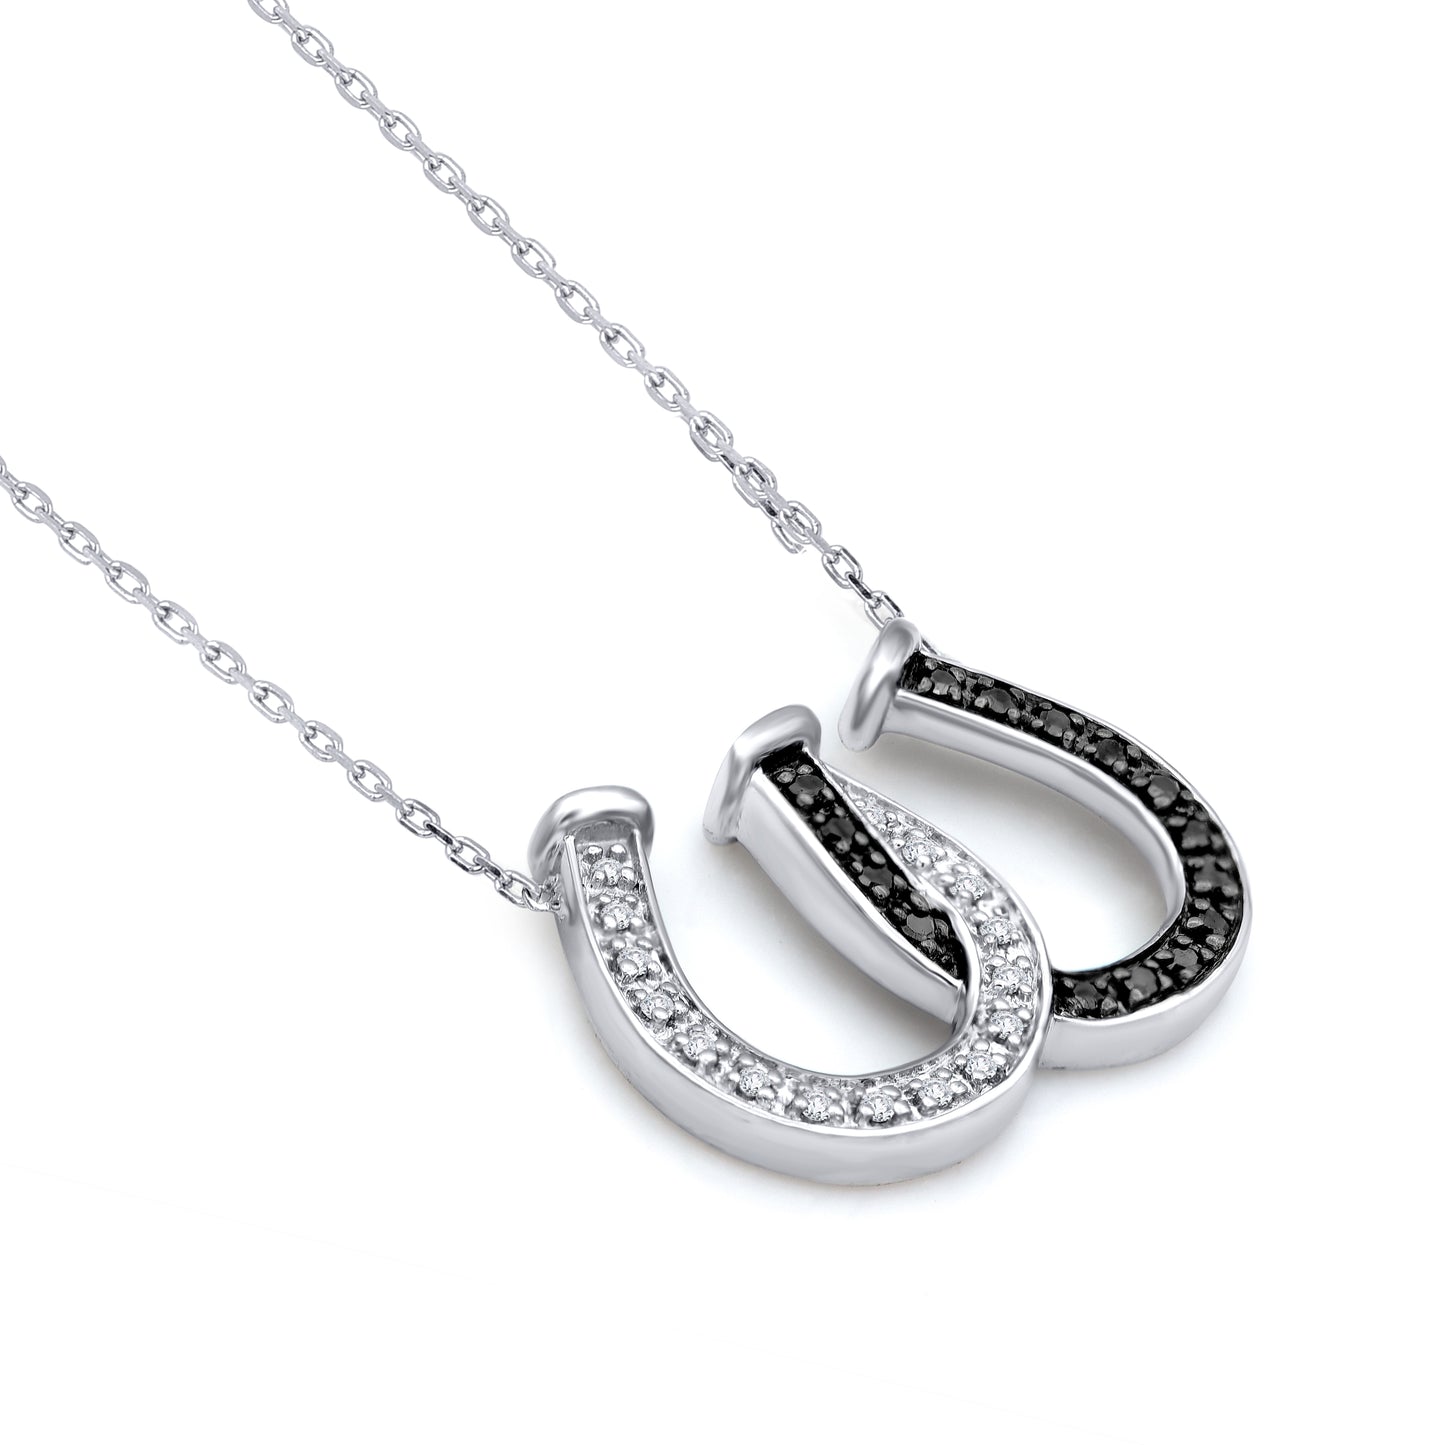 Treated Black Diamond Intertwined Horseshoe Pendant Necklace in 925 Sterling Silver